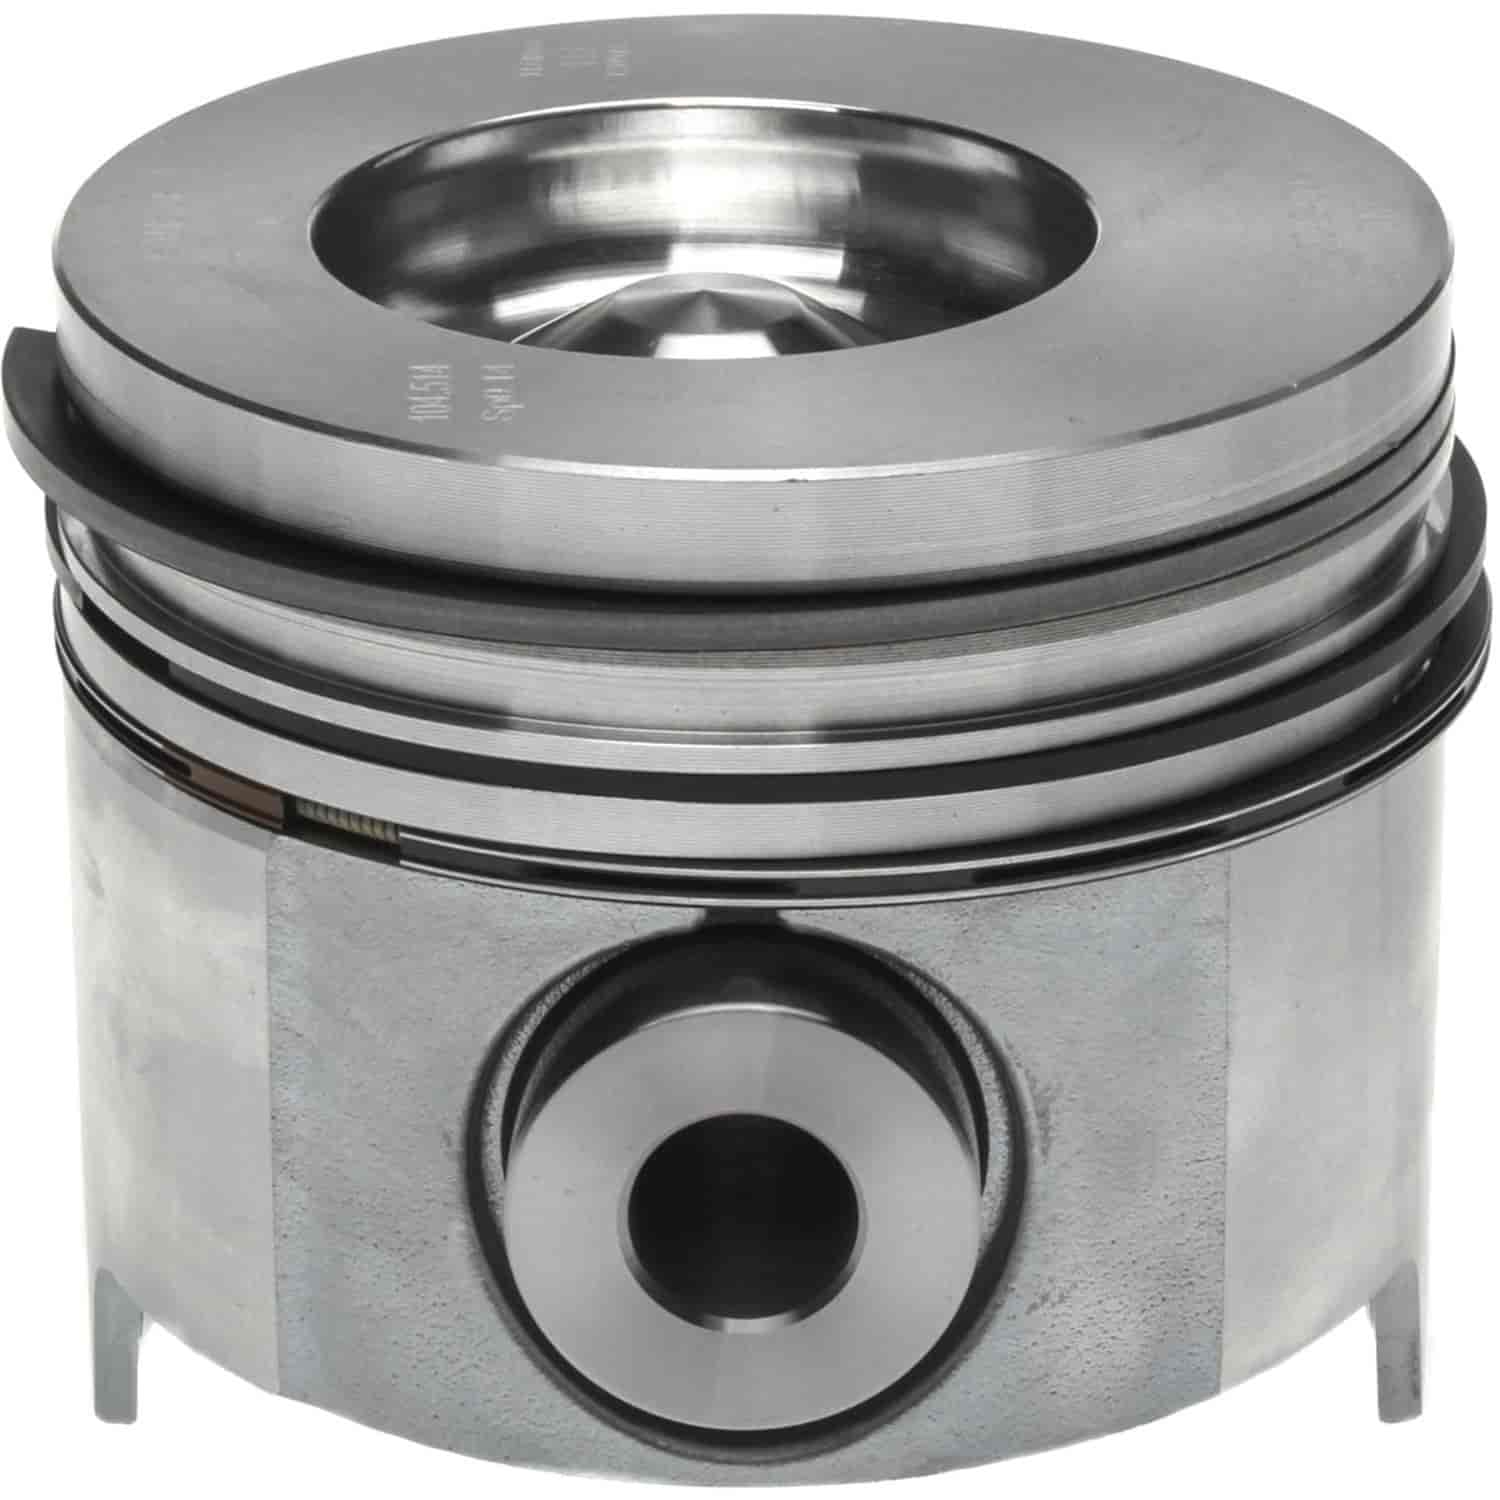 Mahle 224-3452WR Original Standard Right Bank Piston with Rings